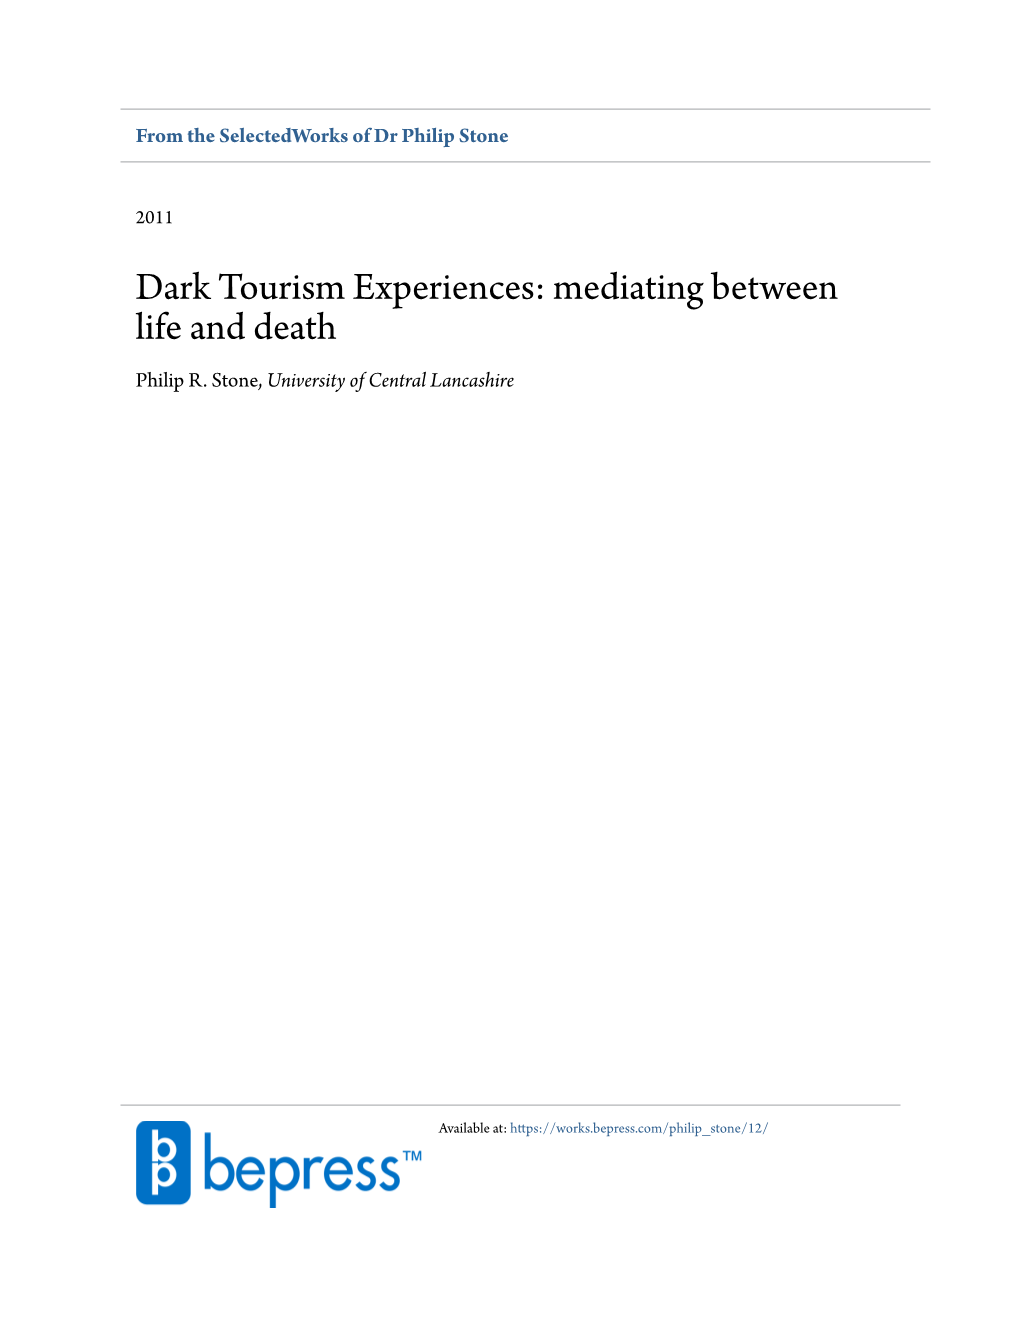 Dark Tourism Experiences: Mediating Between Life and Death Philip R